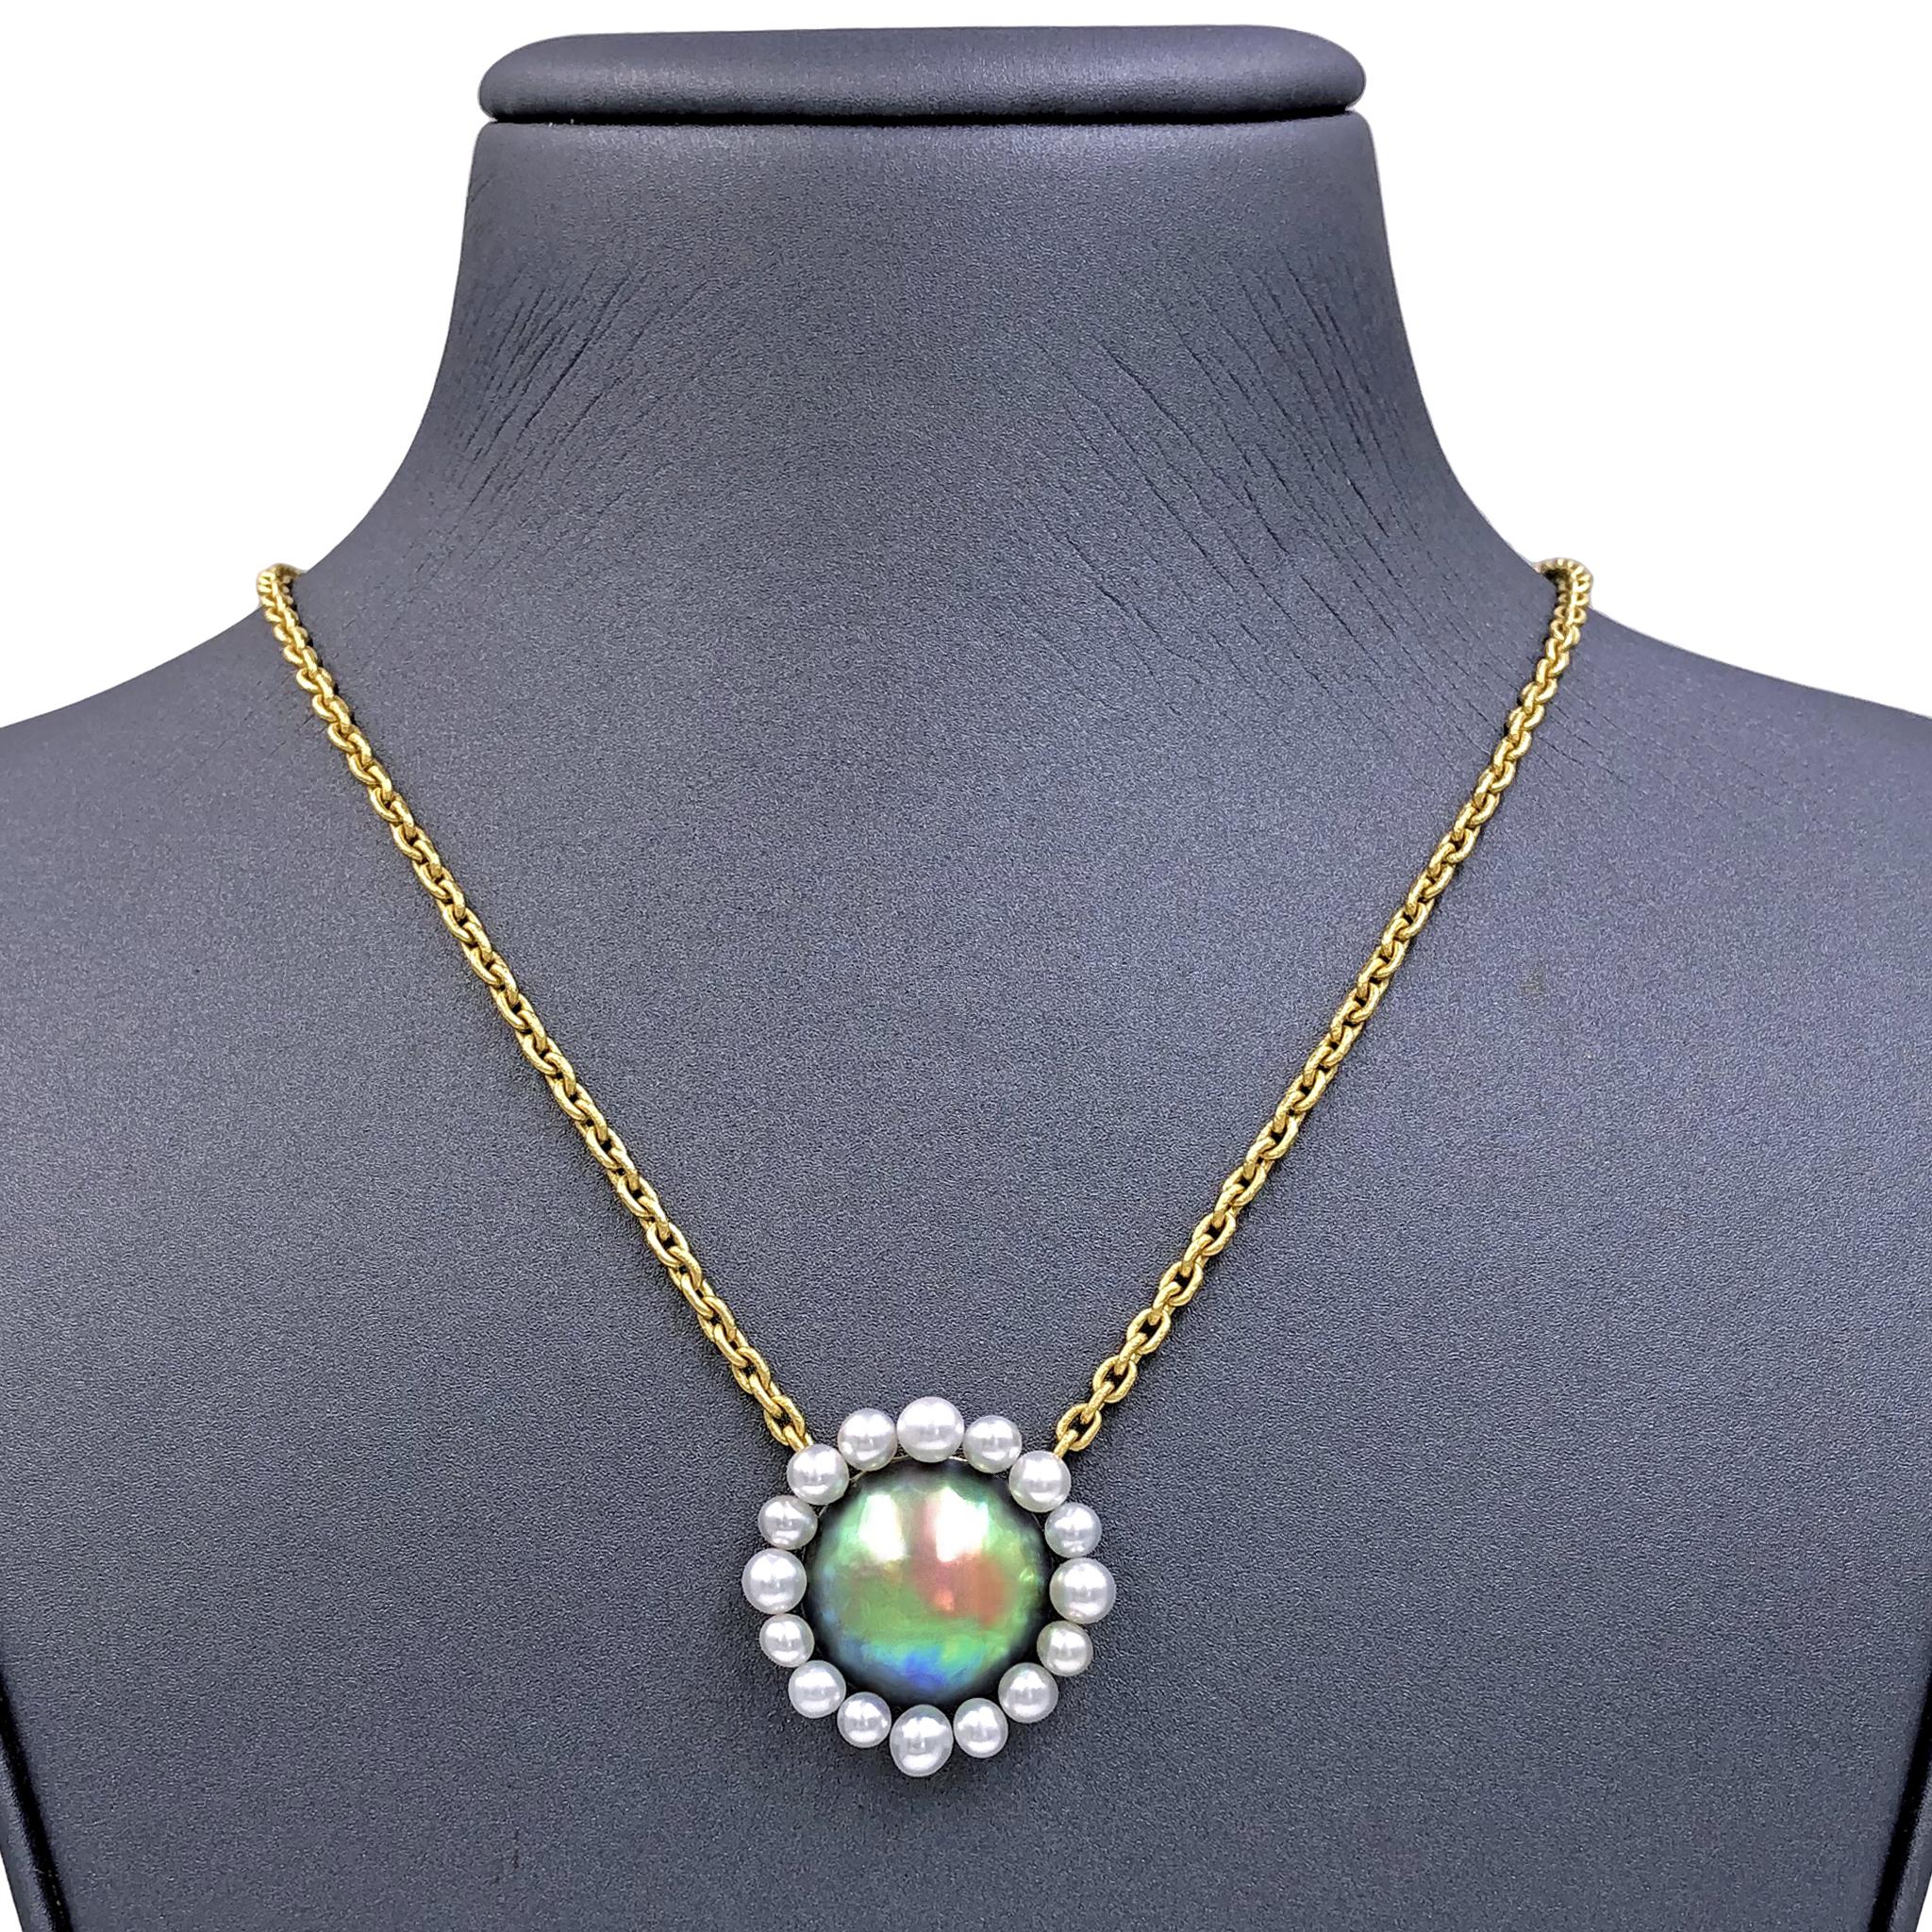 One of a Kind Necklace hand-fabricated by jewelry maker Devta Doolan in a combination of signature-finished 22k yellow gold and platinum showcasing an incredibly rare, extraordinary abalone pearl surrounded by sixteen fine South Sea keshi pearls.